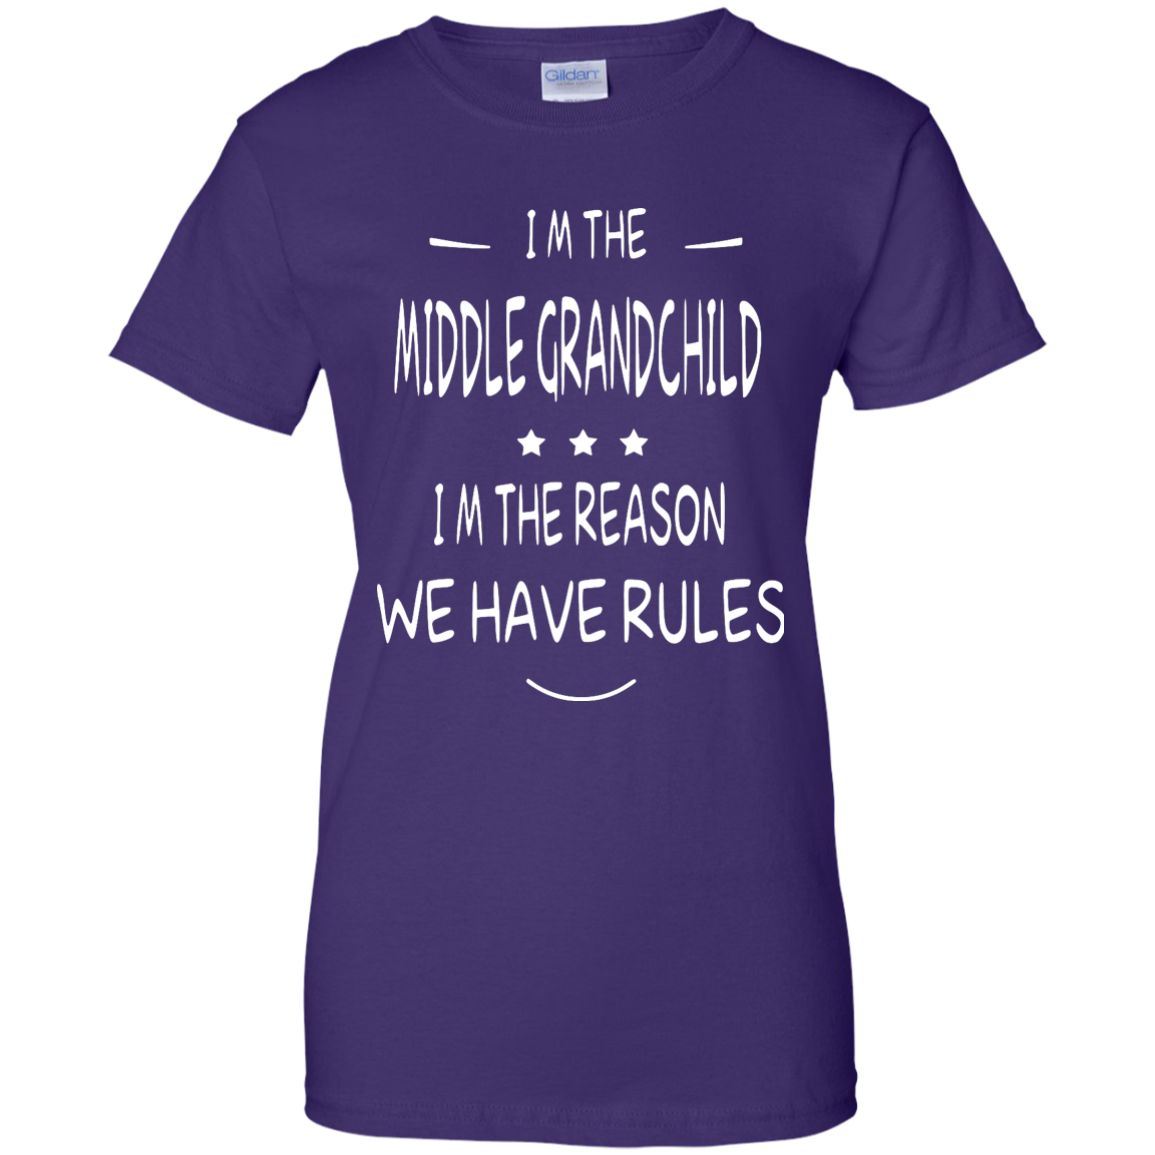 I'm the middle grandchild, I'm the reason we have rules shirt - ifrogtees